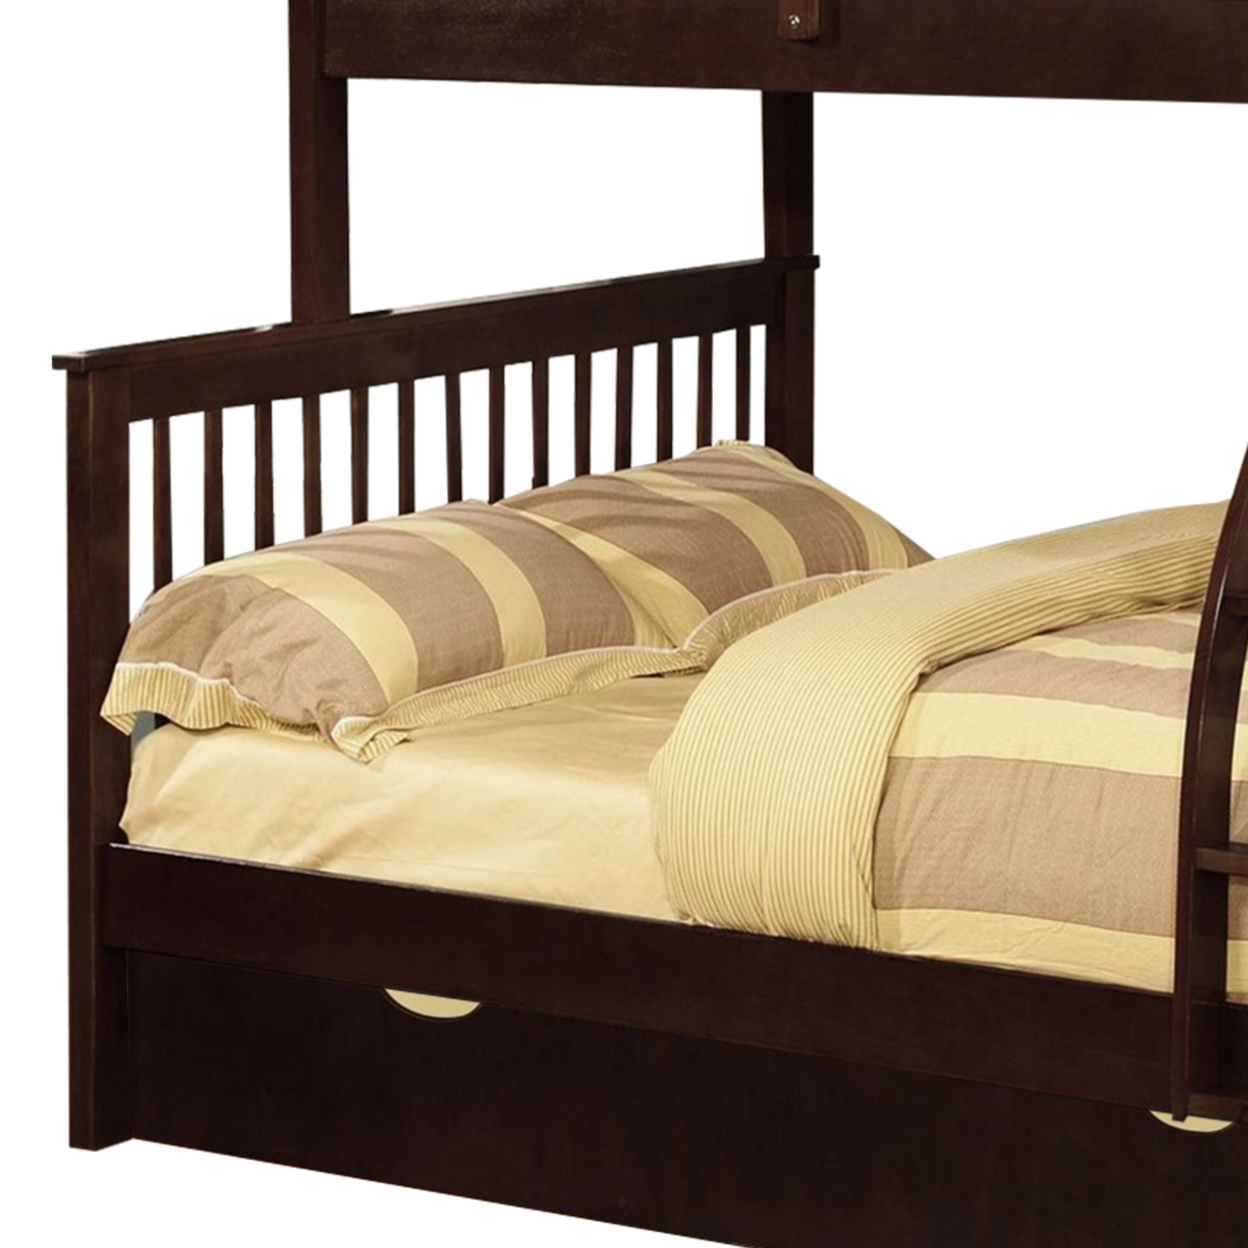 Mission Style Twin Over Full Bunk Bed With Attached Trundle, Dark Brown- Saltoro Sherpi